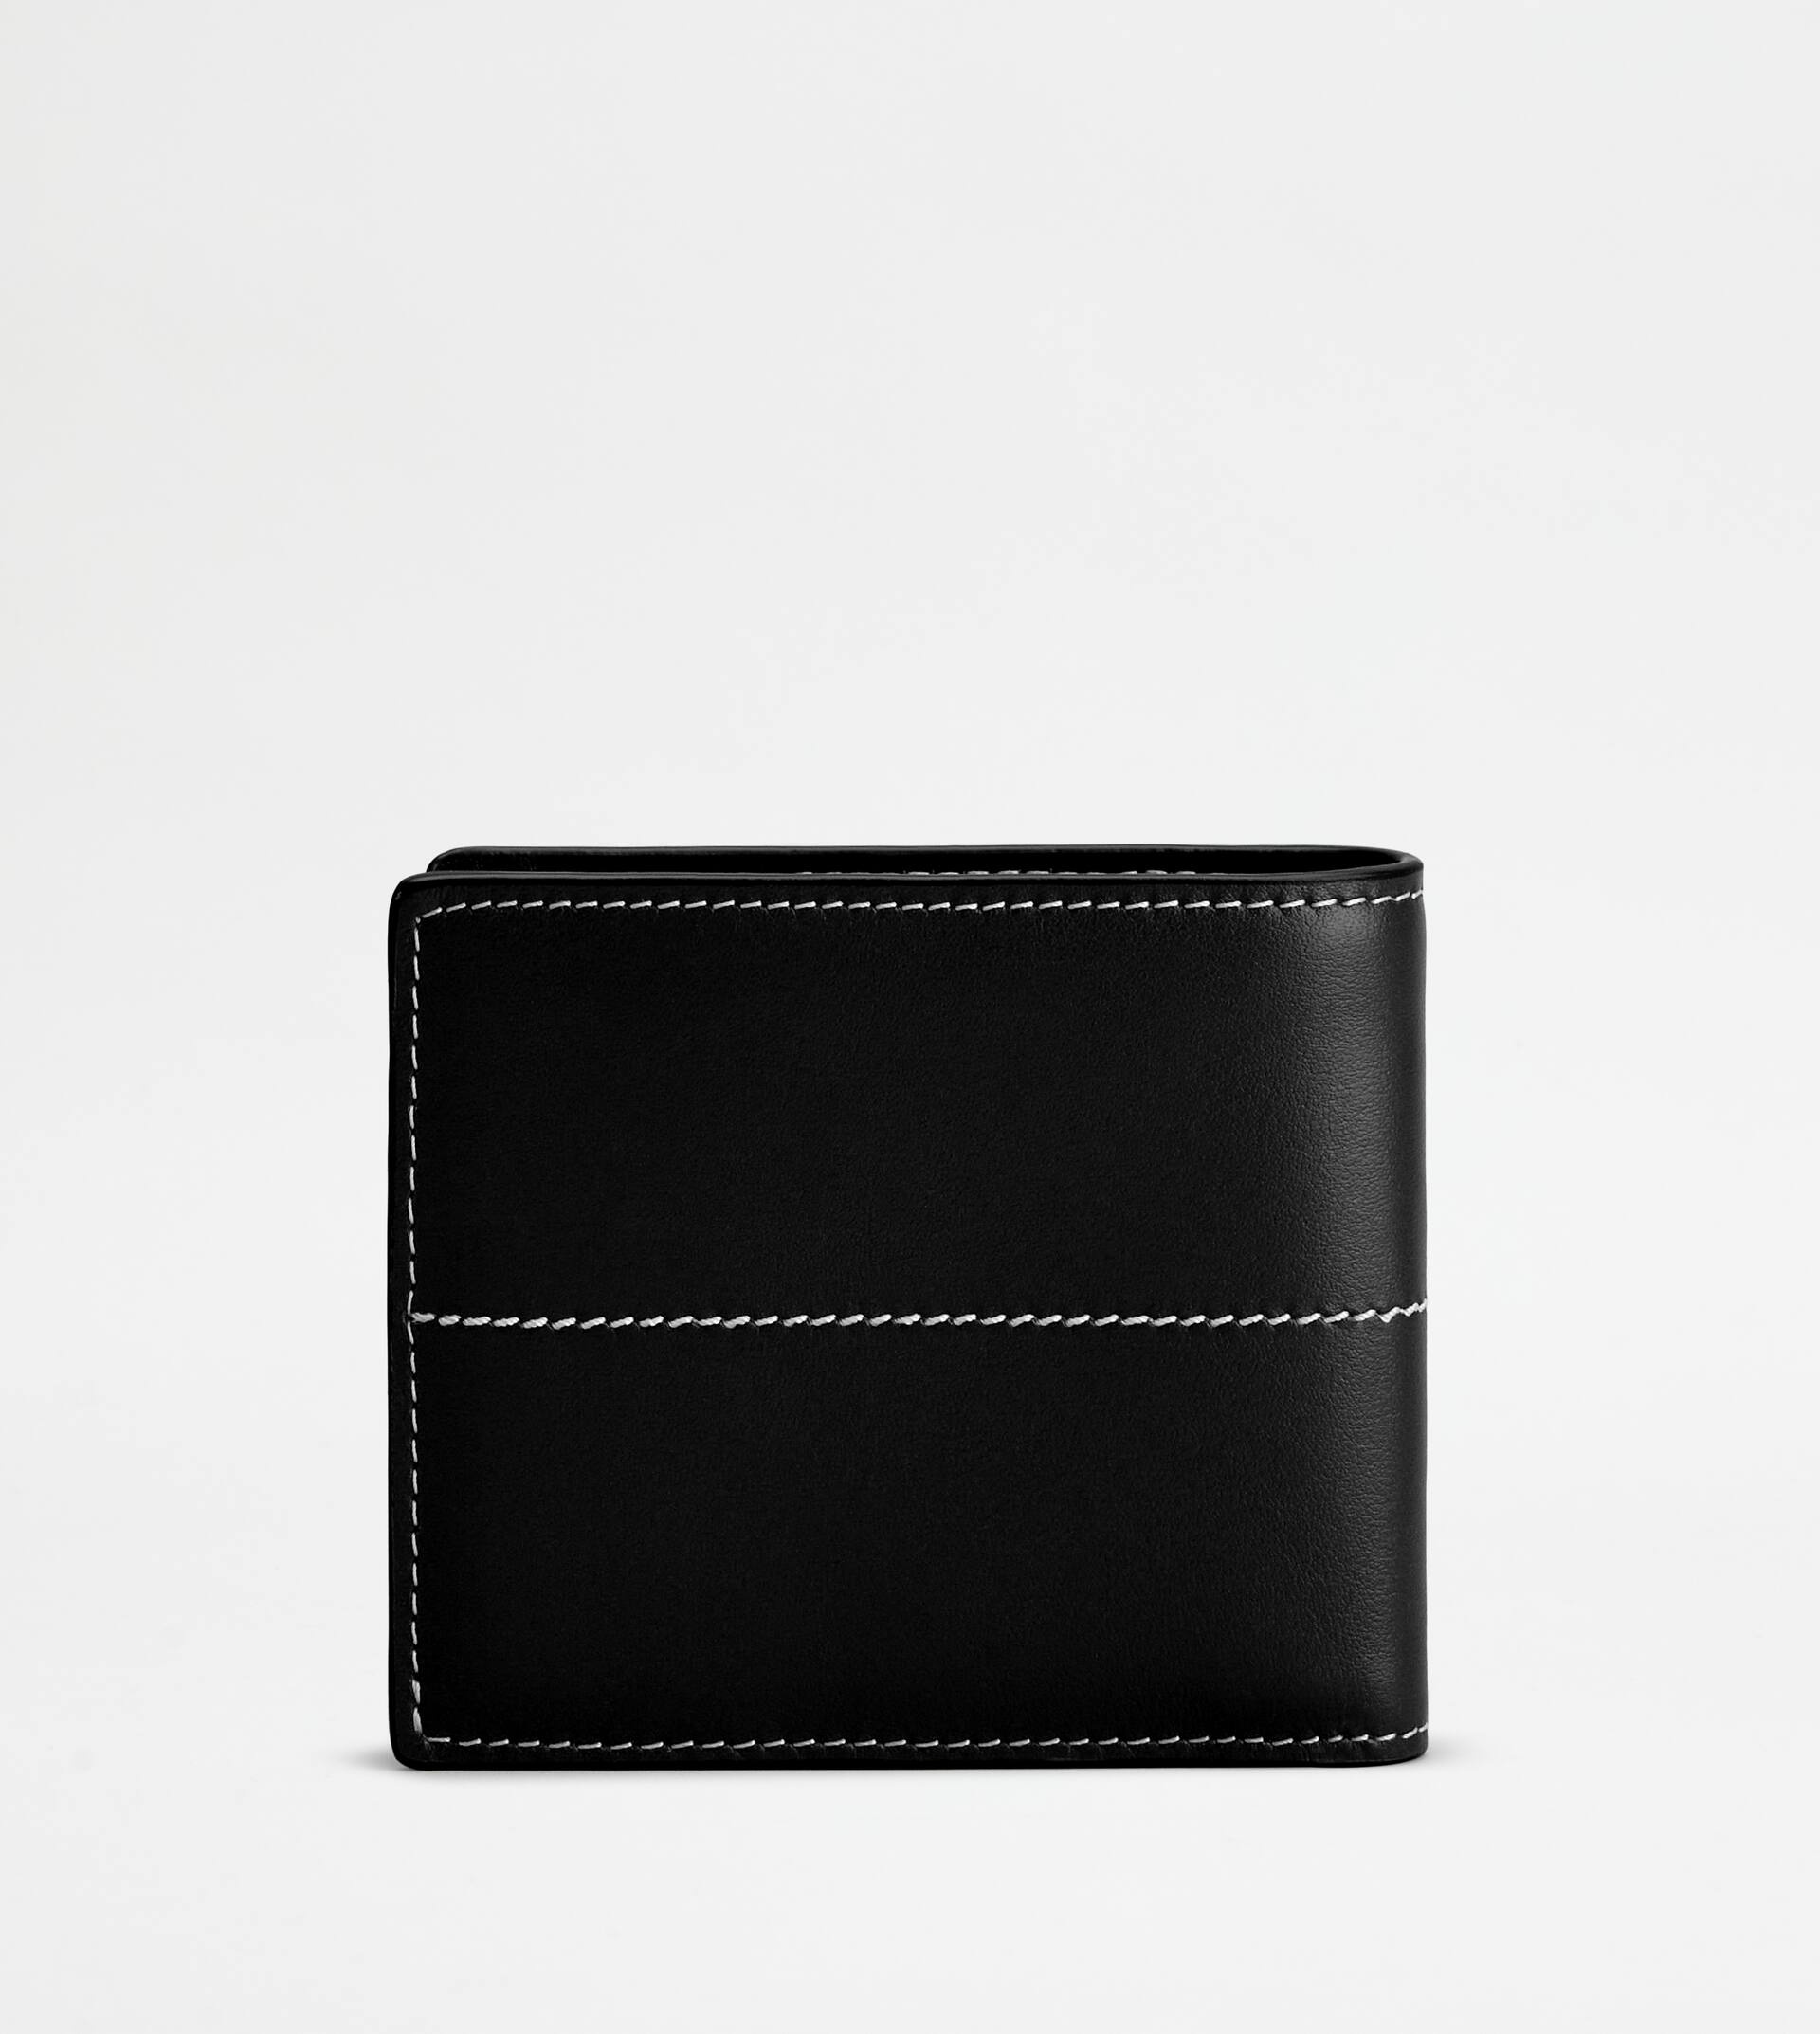 WALLET IN LEATHER - BLACK - 3